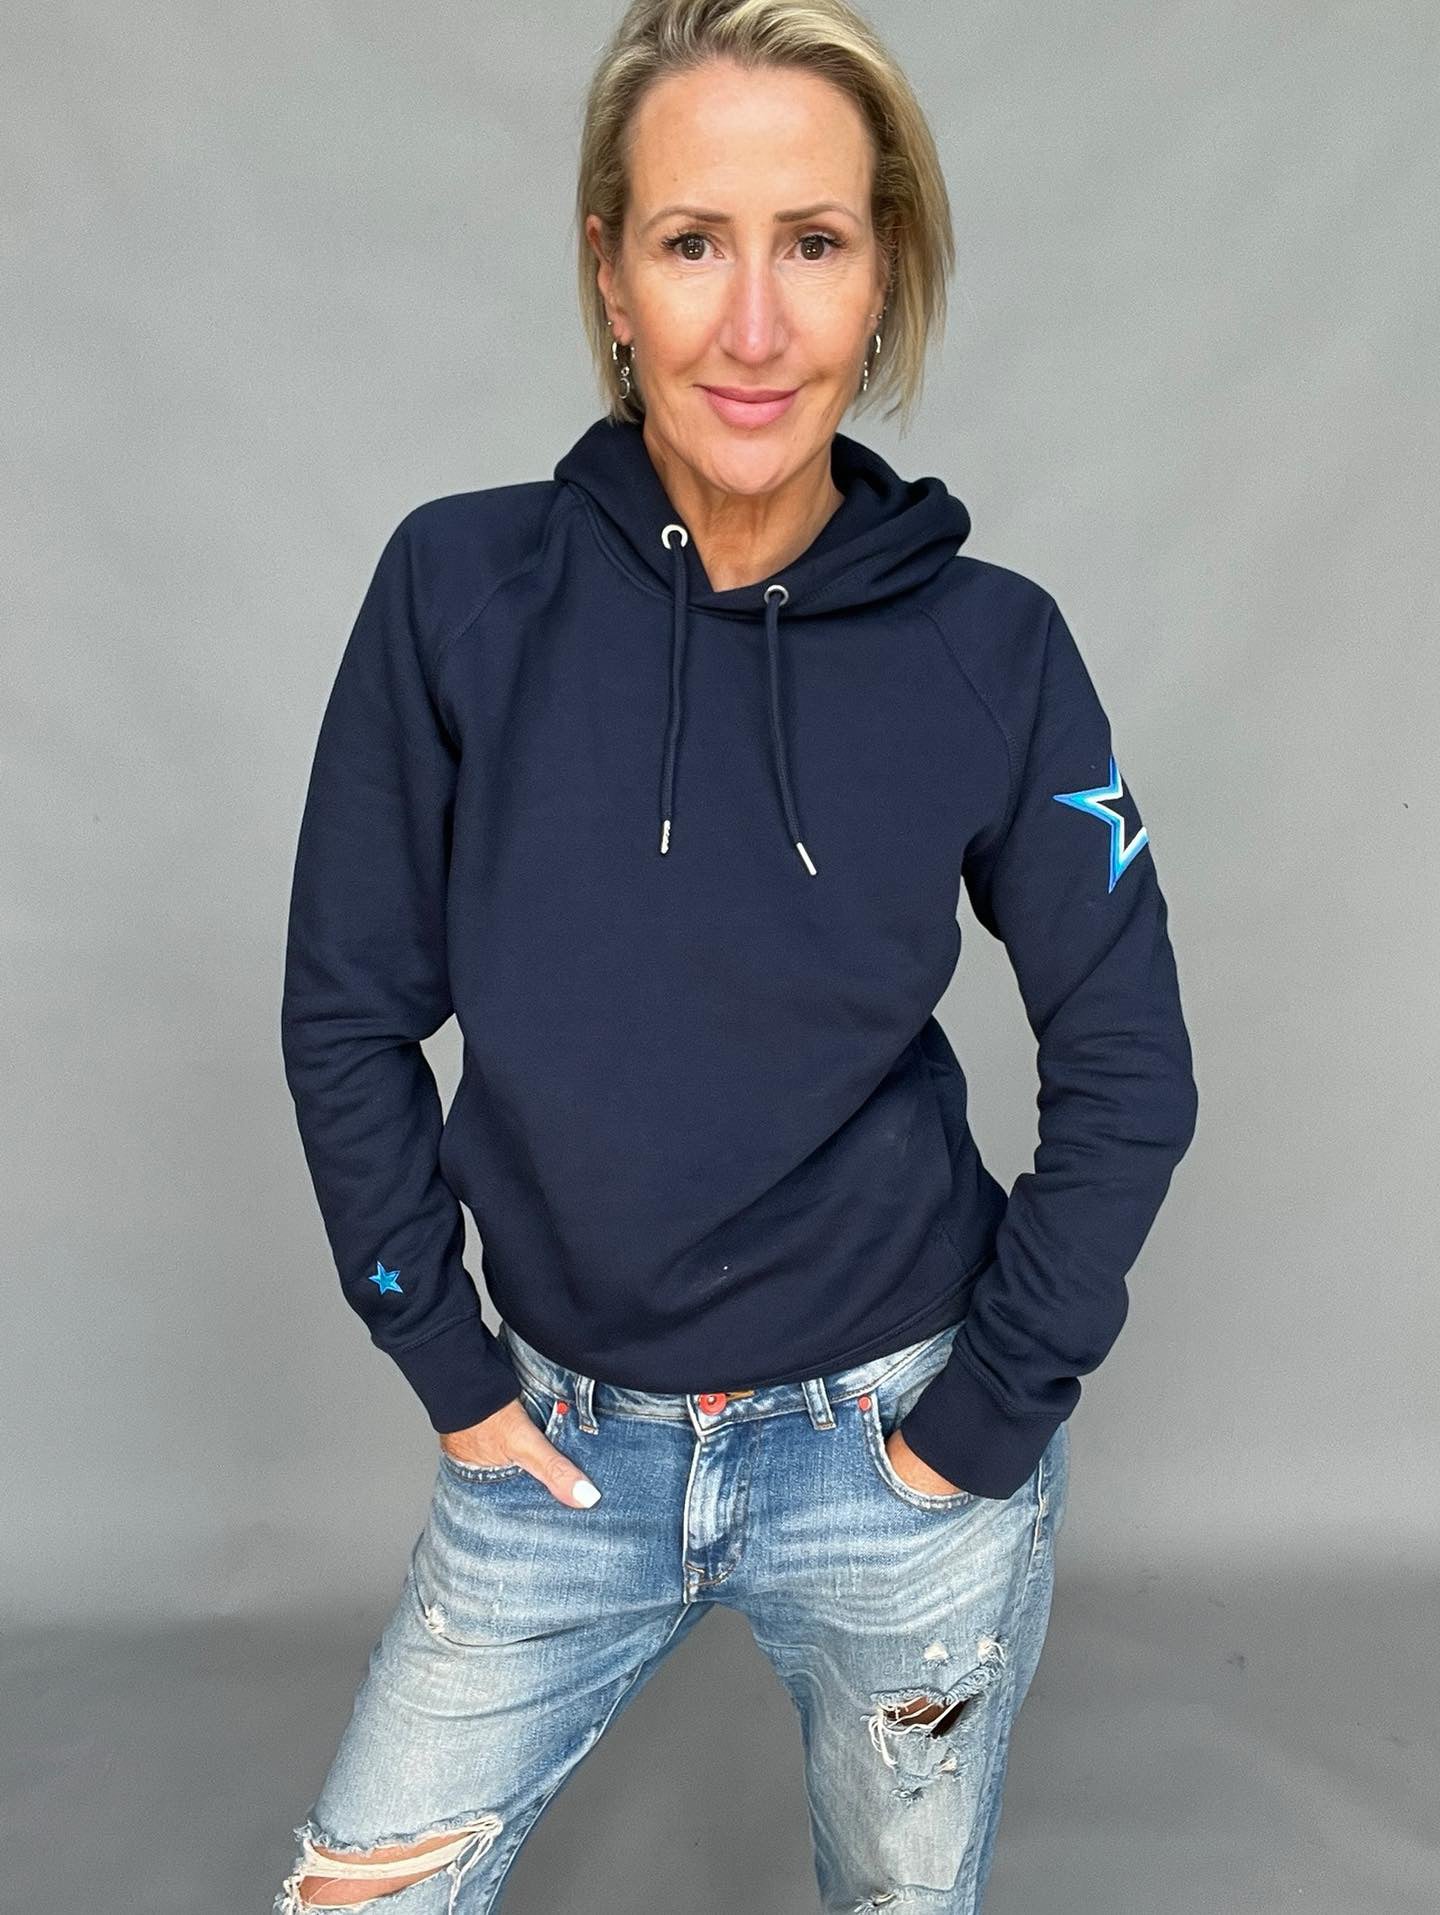 Navy Arm Star Hoodie - MADE TO ORDER